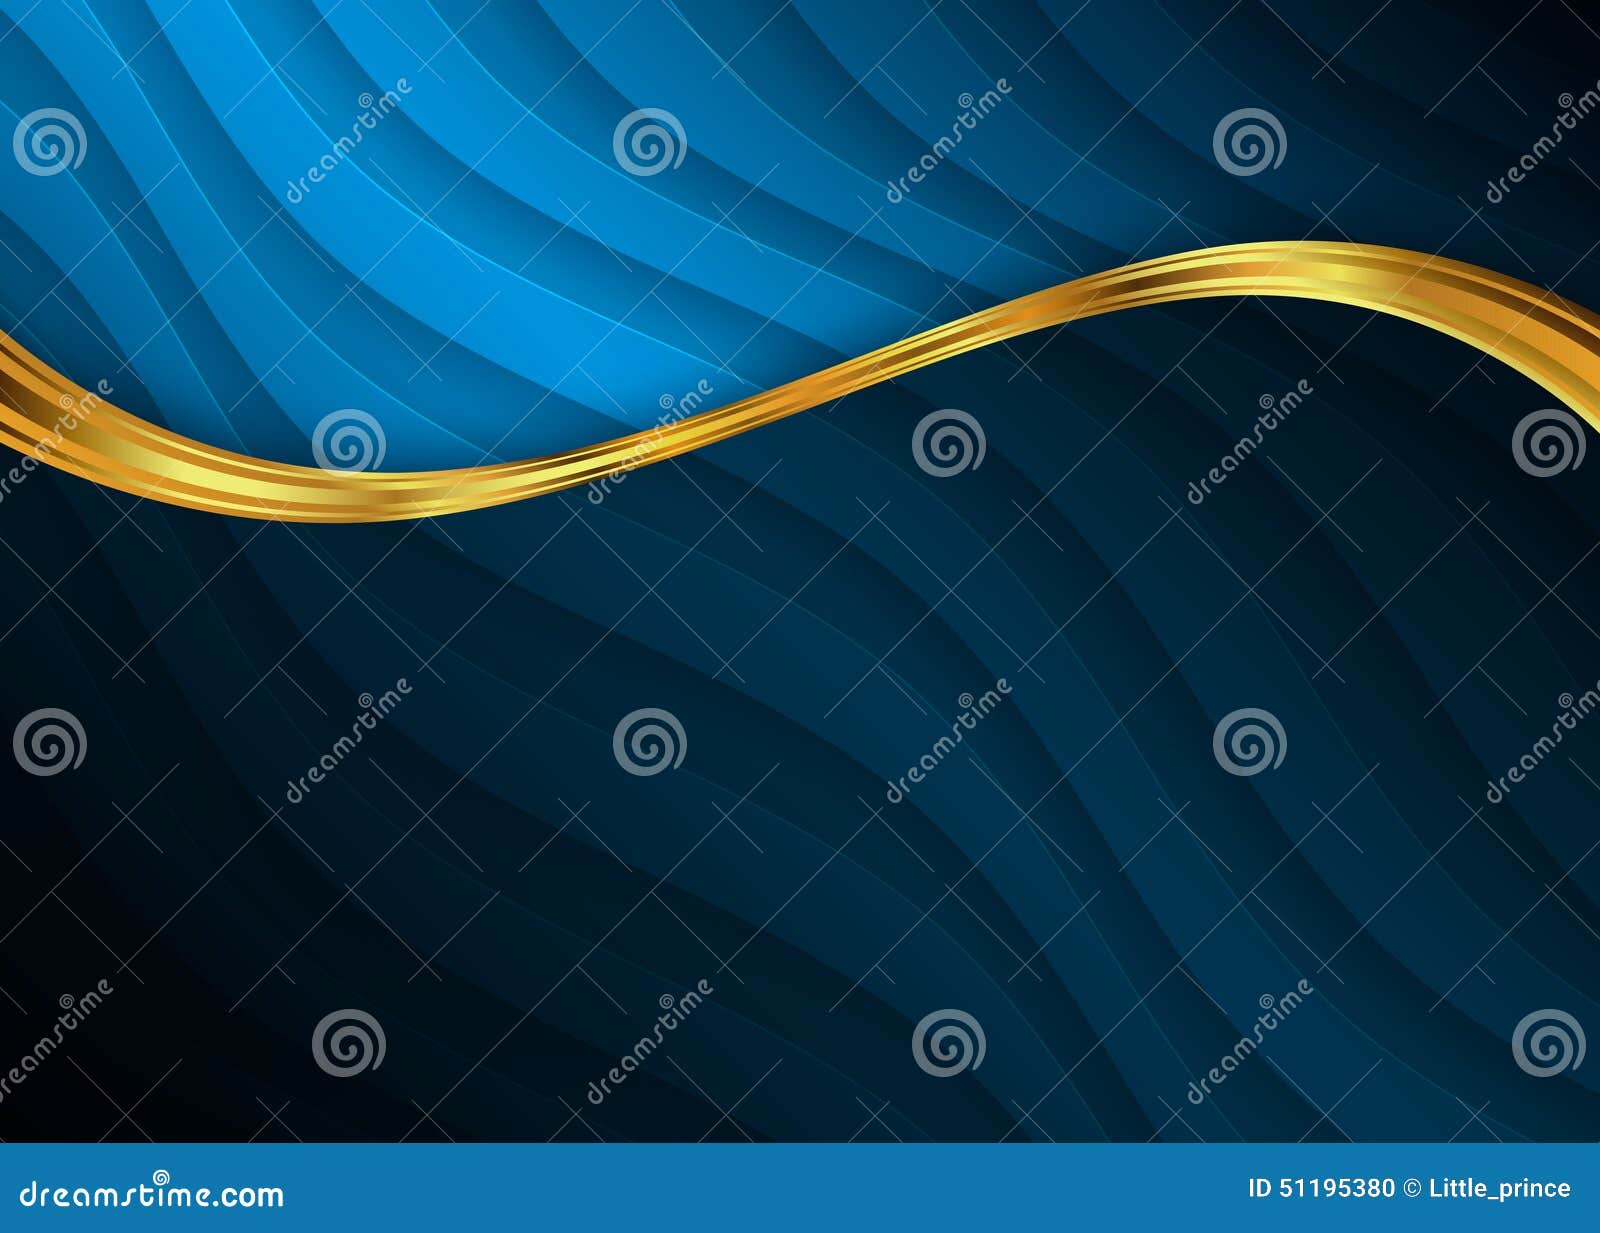 Blue and Gold Abstract Background Template for Website, Banner, Business  Card, Invitation Stock Vector - Illustration of geometric, banner: 51195380